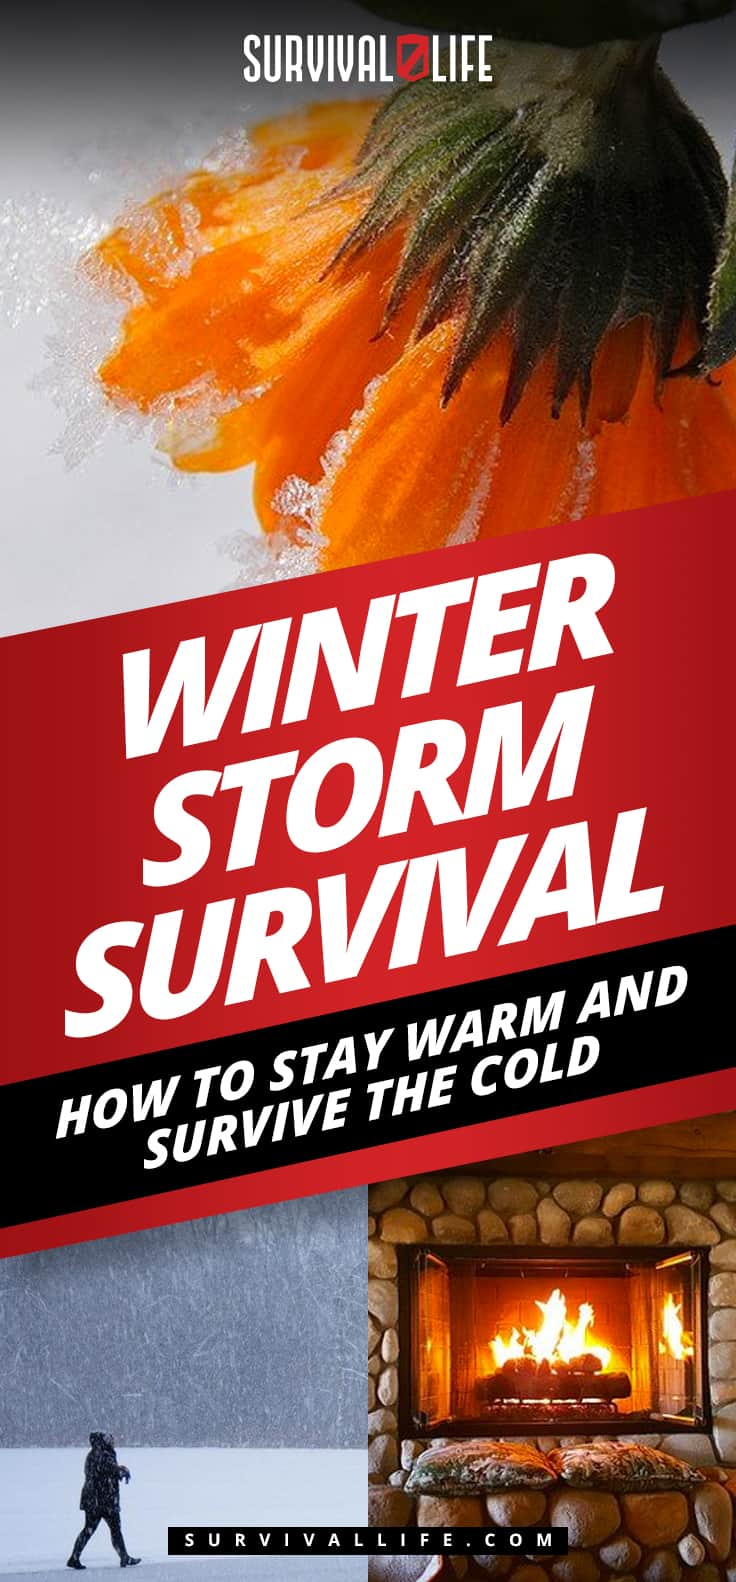 Winter Storm Survival: How To Stay Warm And Survive The Cold | https://survivallife.com/winter-storms-how-to-survive/